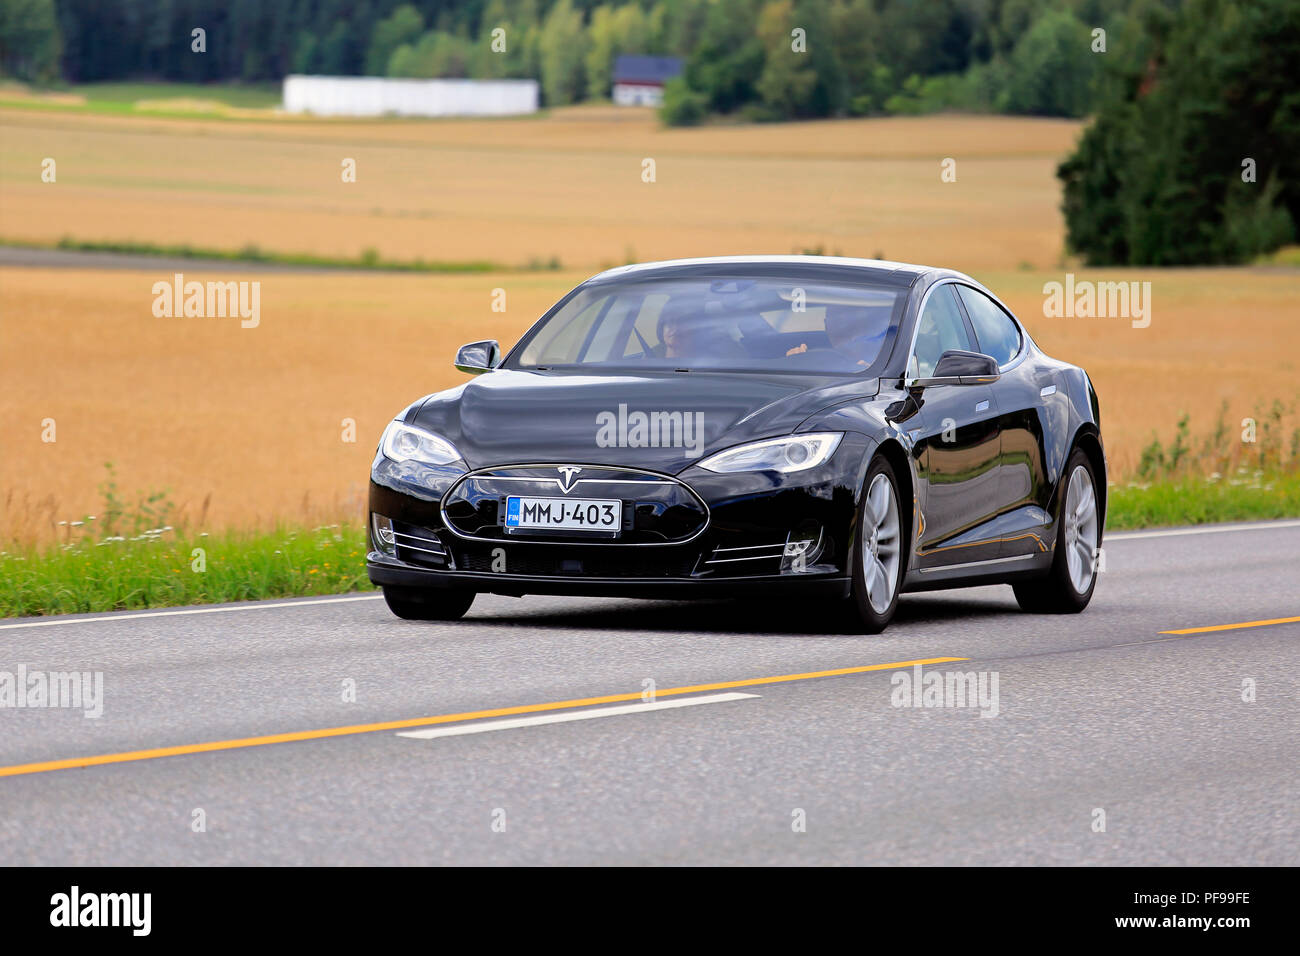 Salo, Finland - August 5, 2018: Black Tesla Model S electric car moves along rural highway on a day of early autumn. Stock Photo